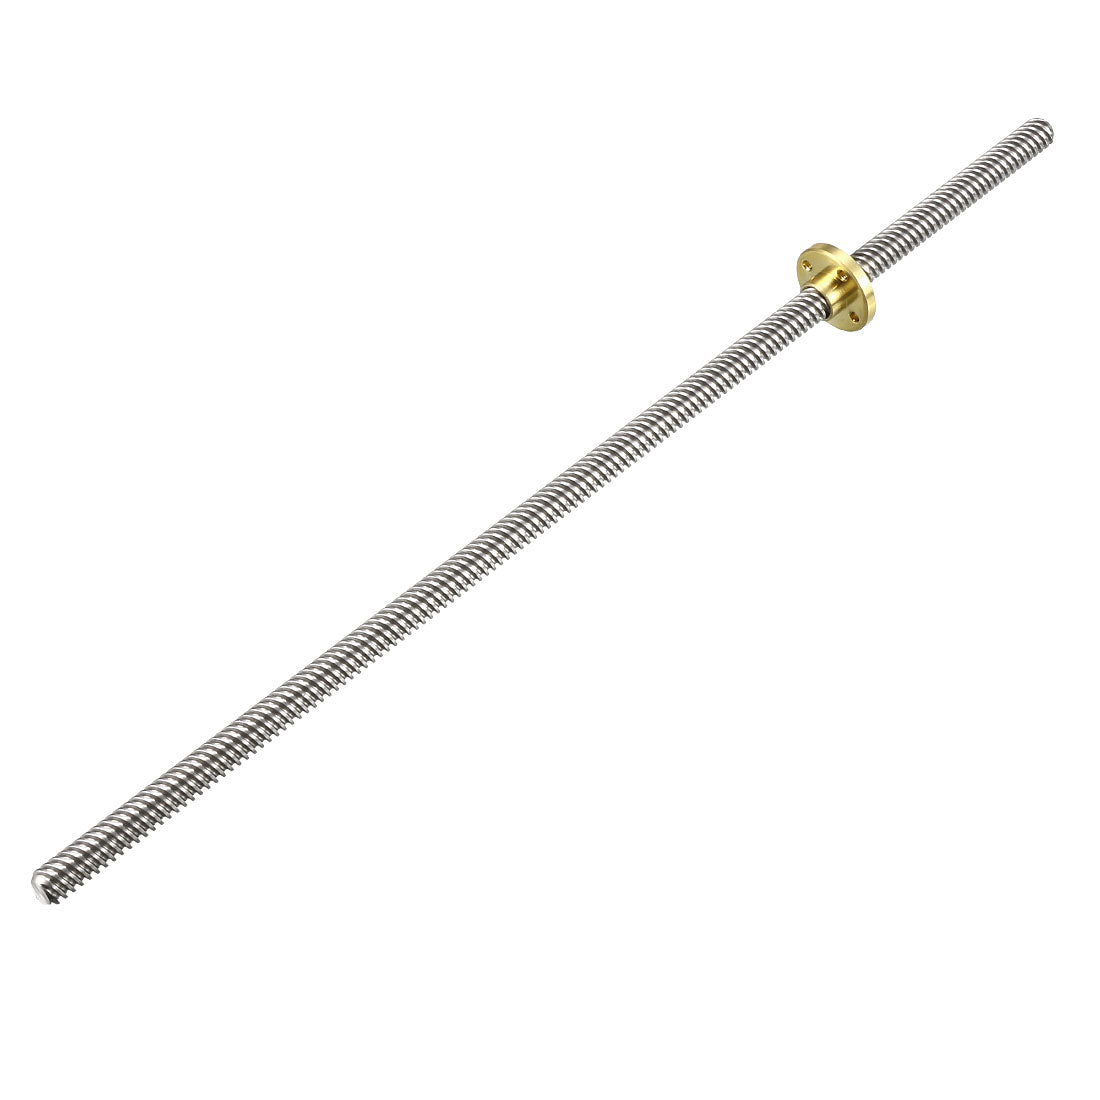 uxcell Uxcell 300mm T8 Pitch 2mm Lead 8mm Lead Screw Rod with Copper Nut for 3D Printer